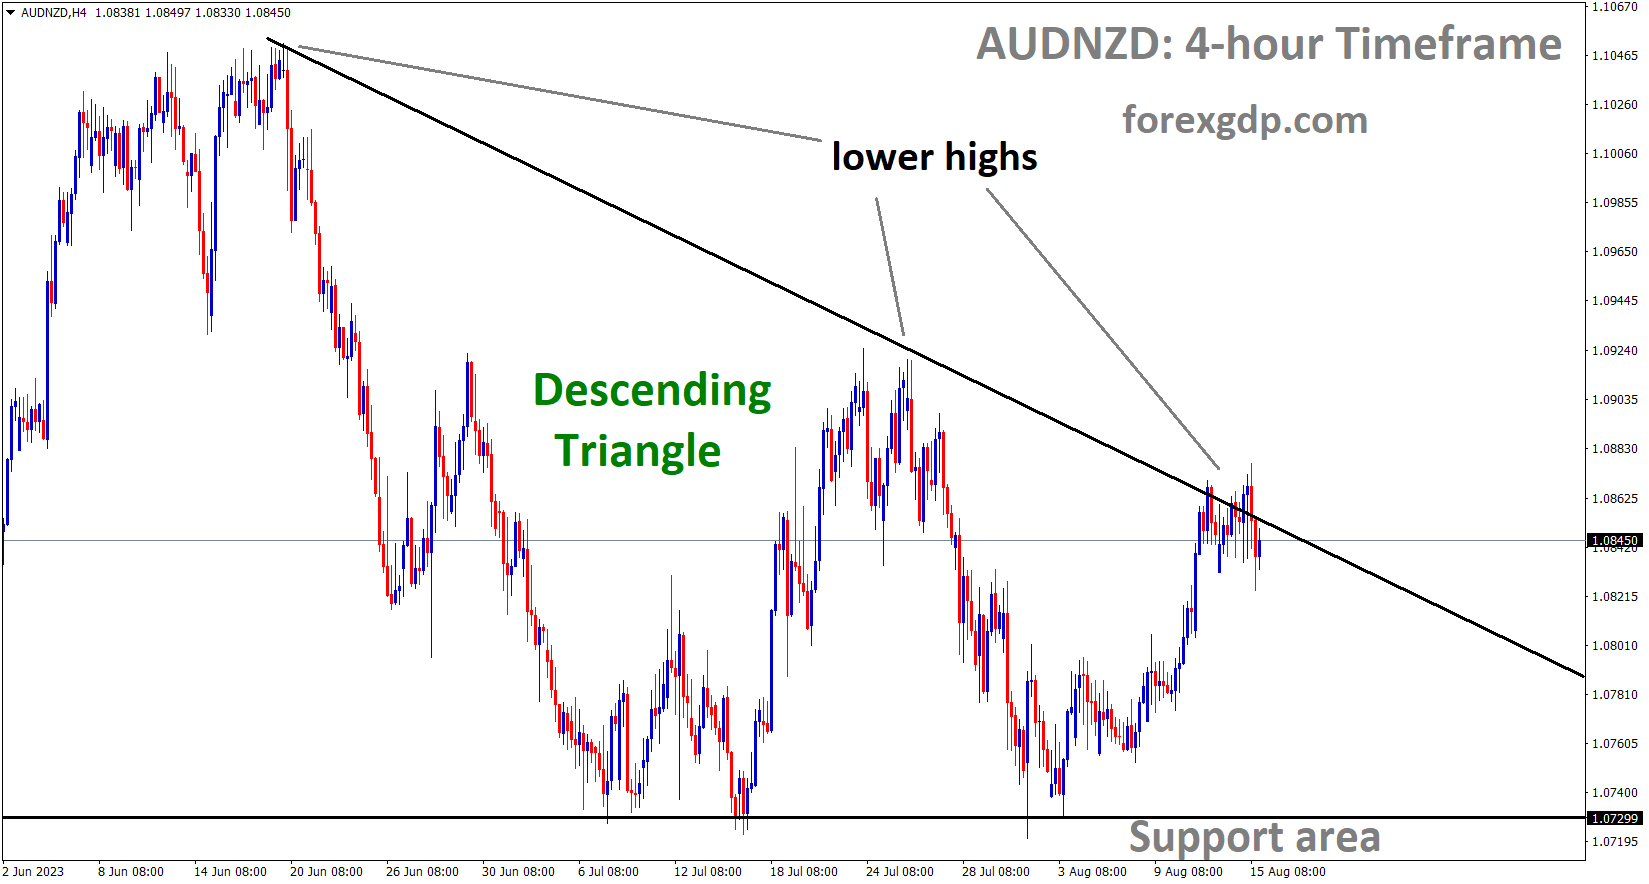 AUDNZD H4 TF Analysis Market is moving in the Descending triangle pattern and the market has fallen from the lower high area of the pattern